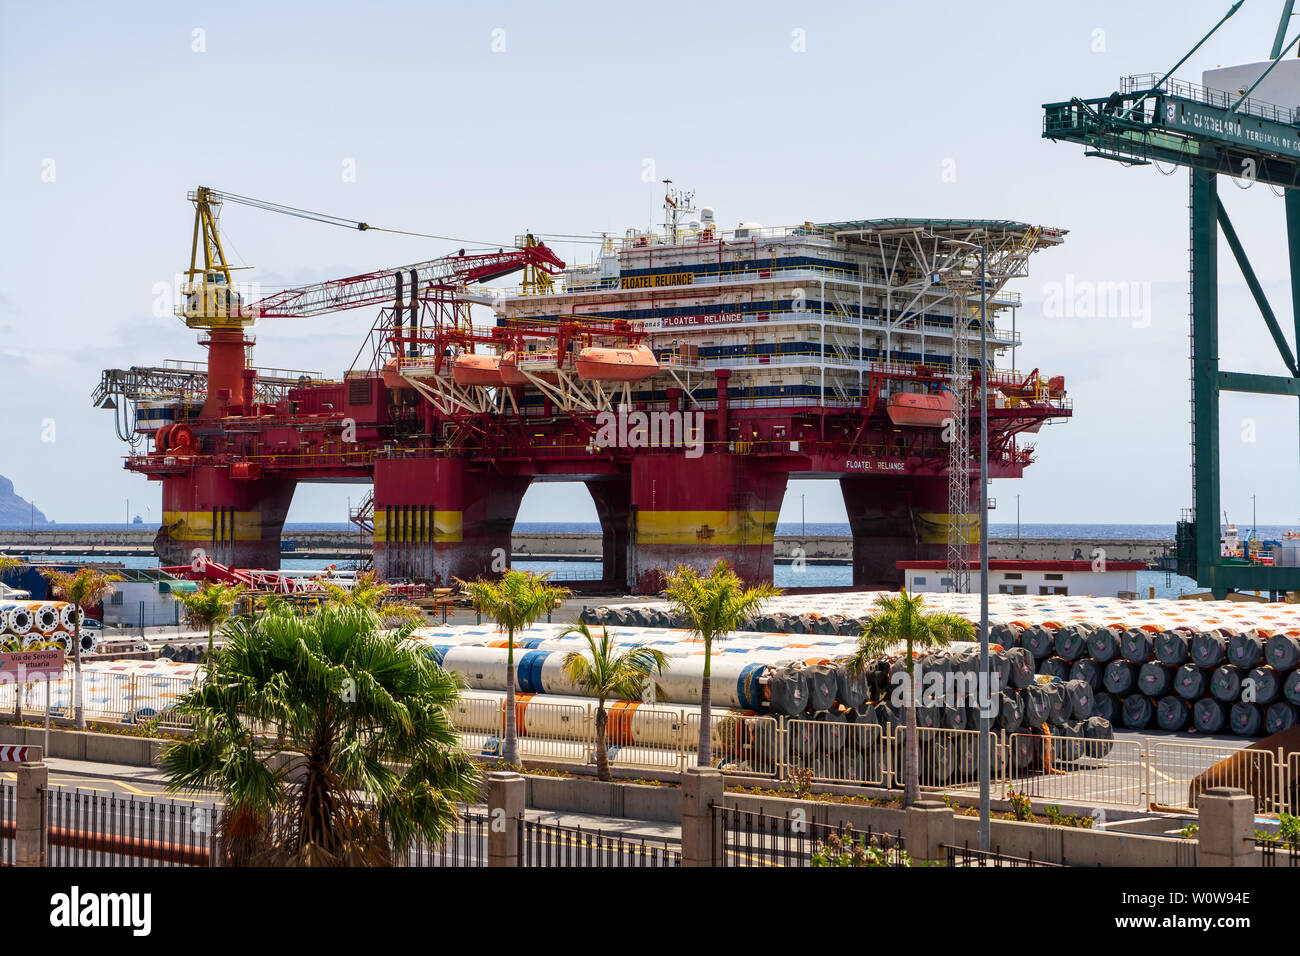 SANTA CRUZ, CANARY ISLANDS, SPAIN - JULY 28, 2018: Platform Floatel Reliance in the seaport. Floatel Reliance is a semi-submersible accommodation and construction support vessel. Stock Photo